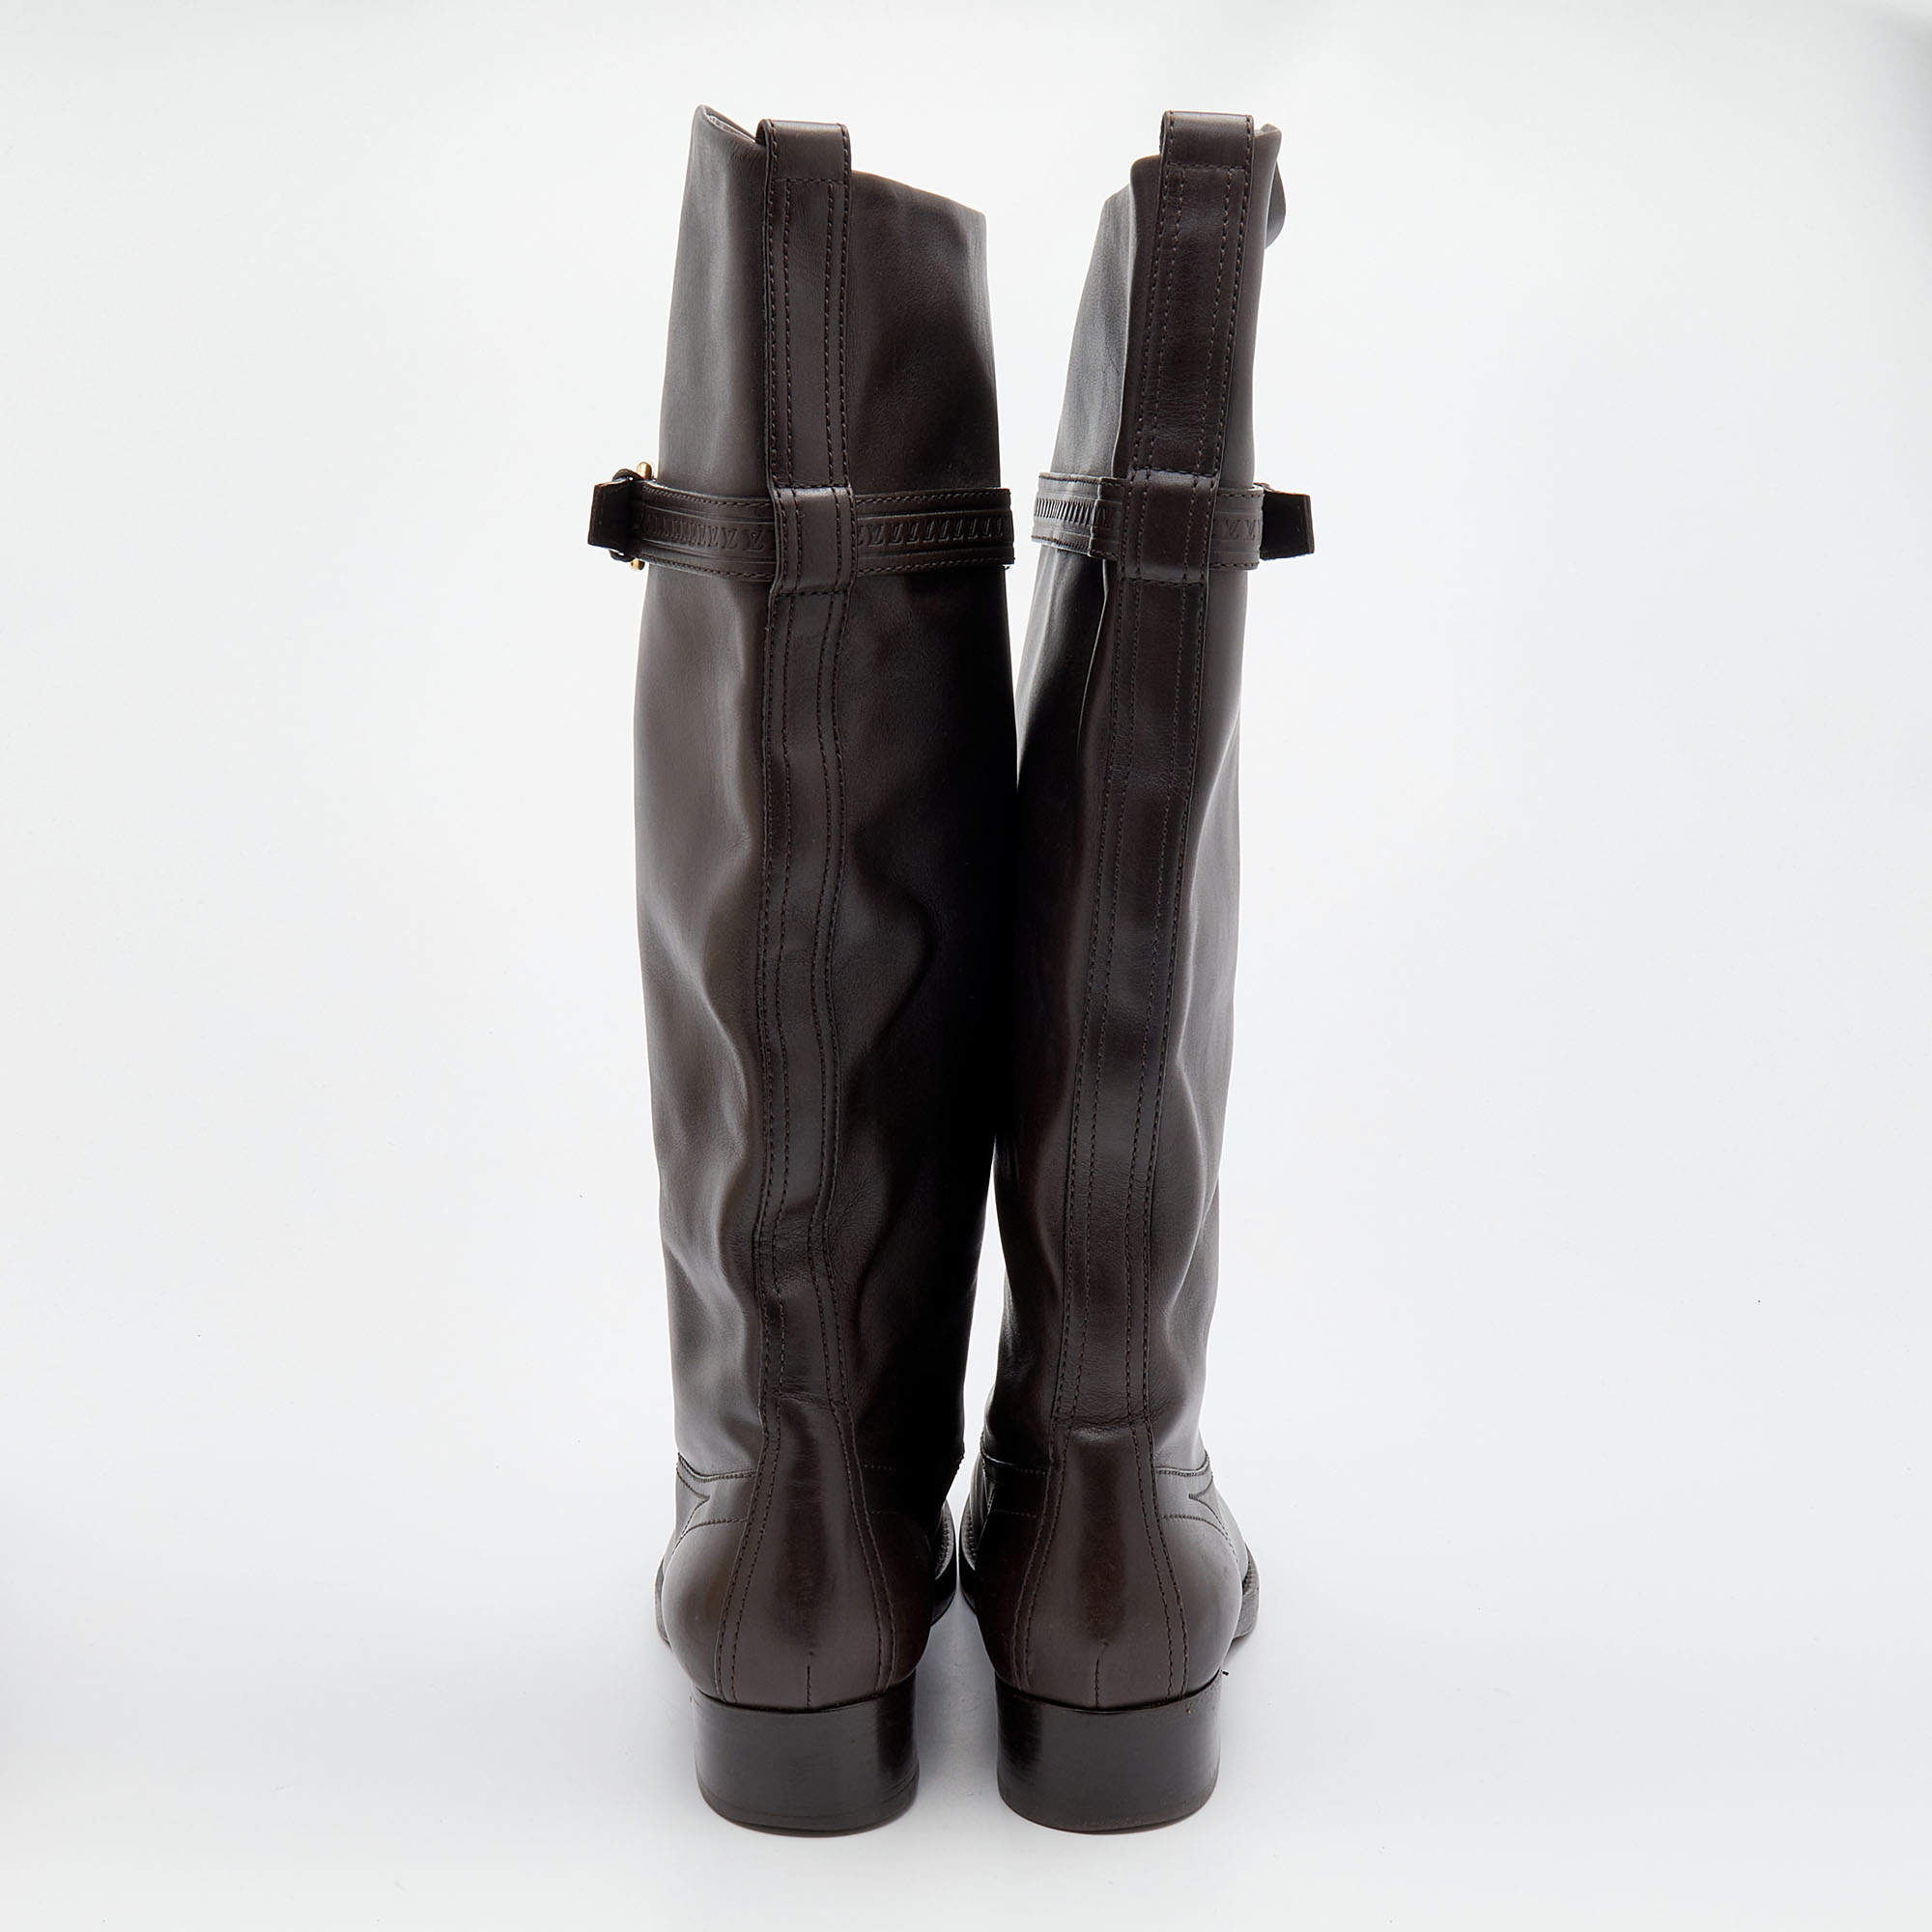 Louis Vuitton Brown Leather Knee High Riding Boots Size 39.5